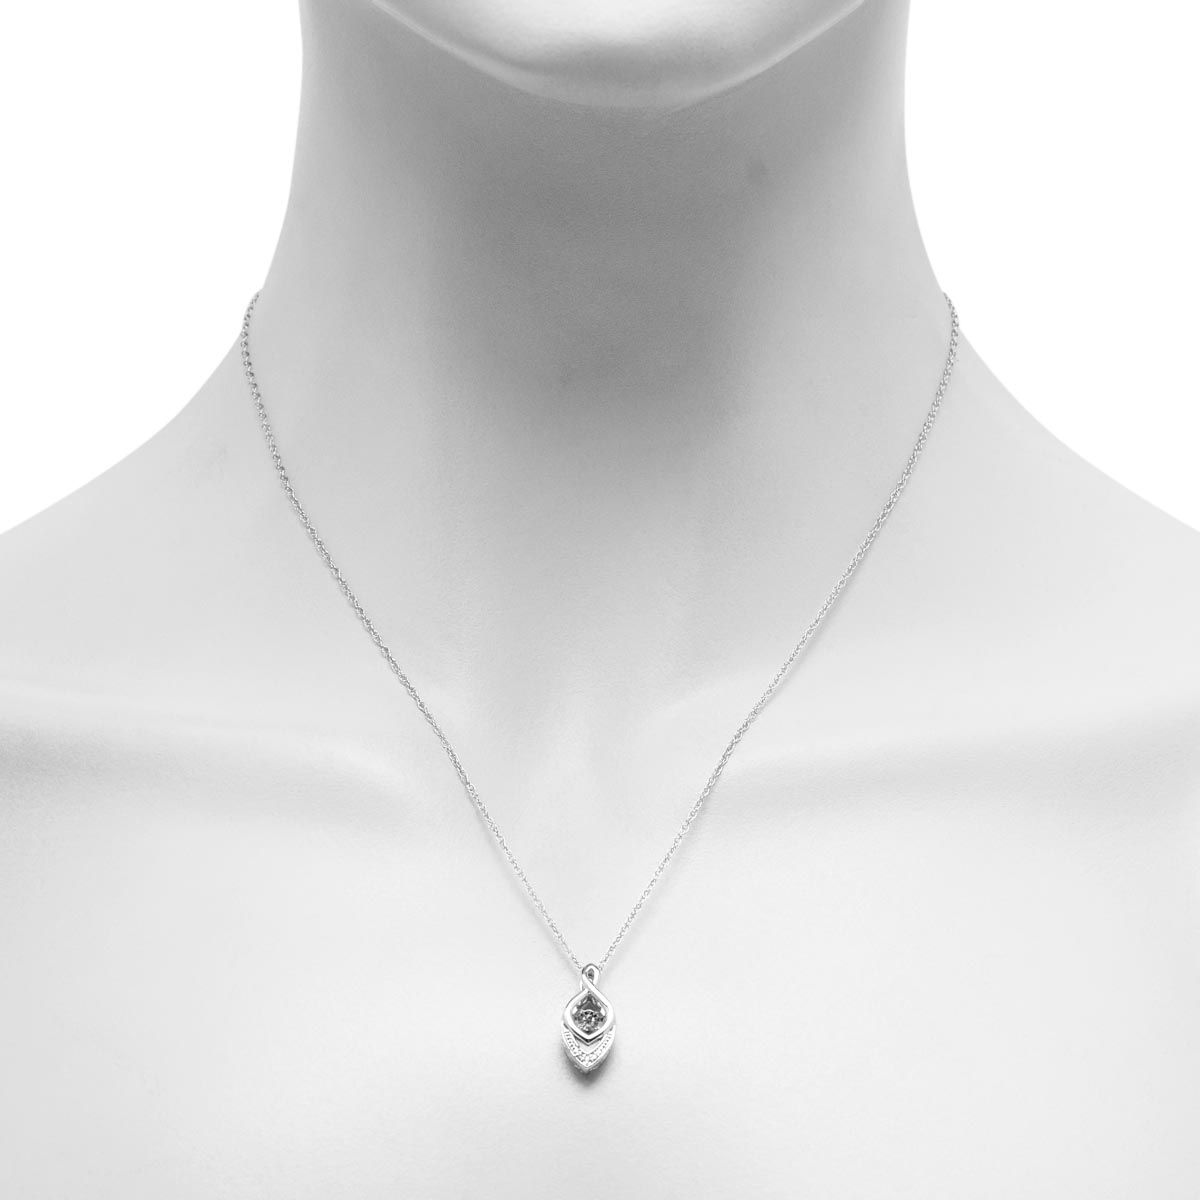 Heart Beat Diamond Earrings and Necklace Set in Sterling Silver (.05ct tw)